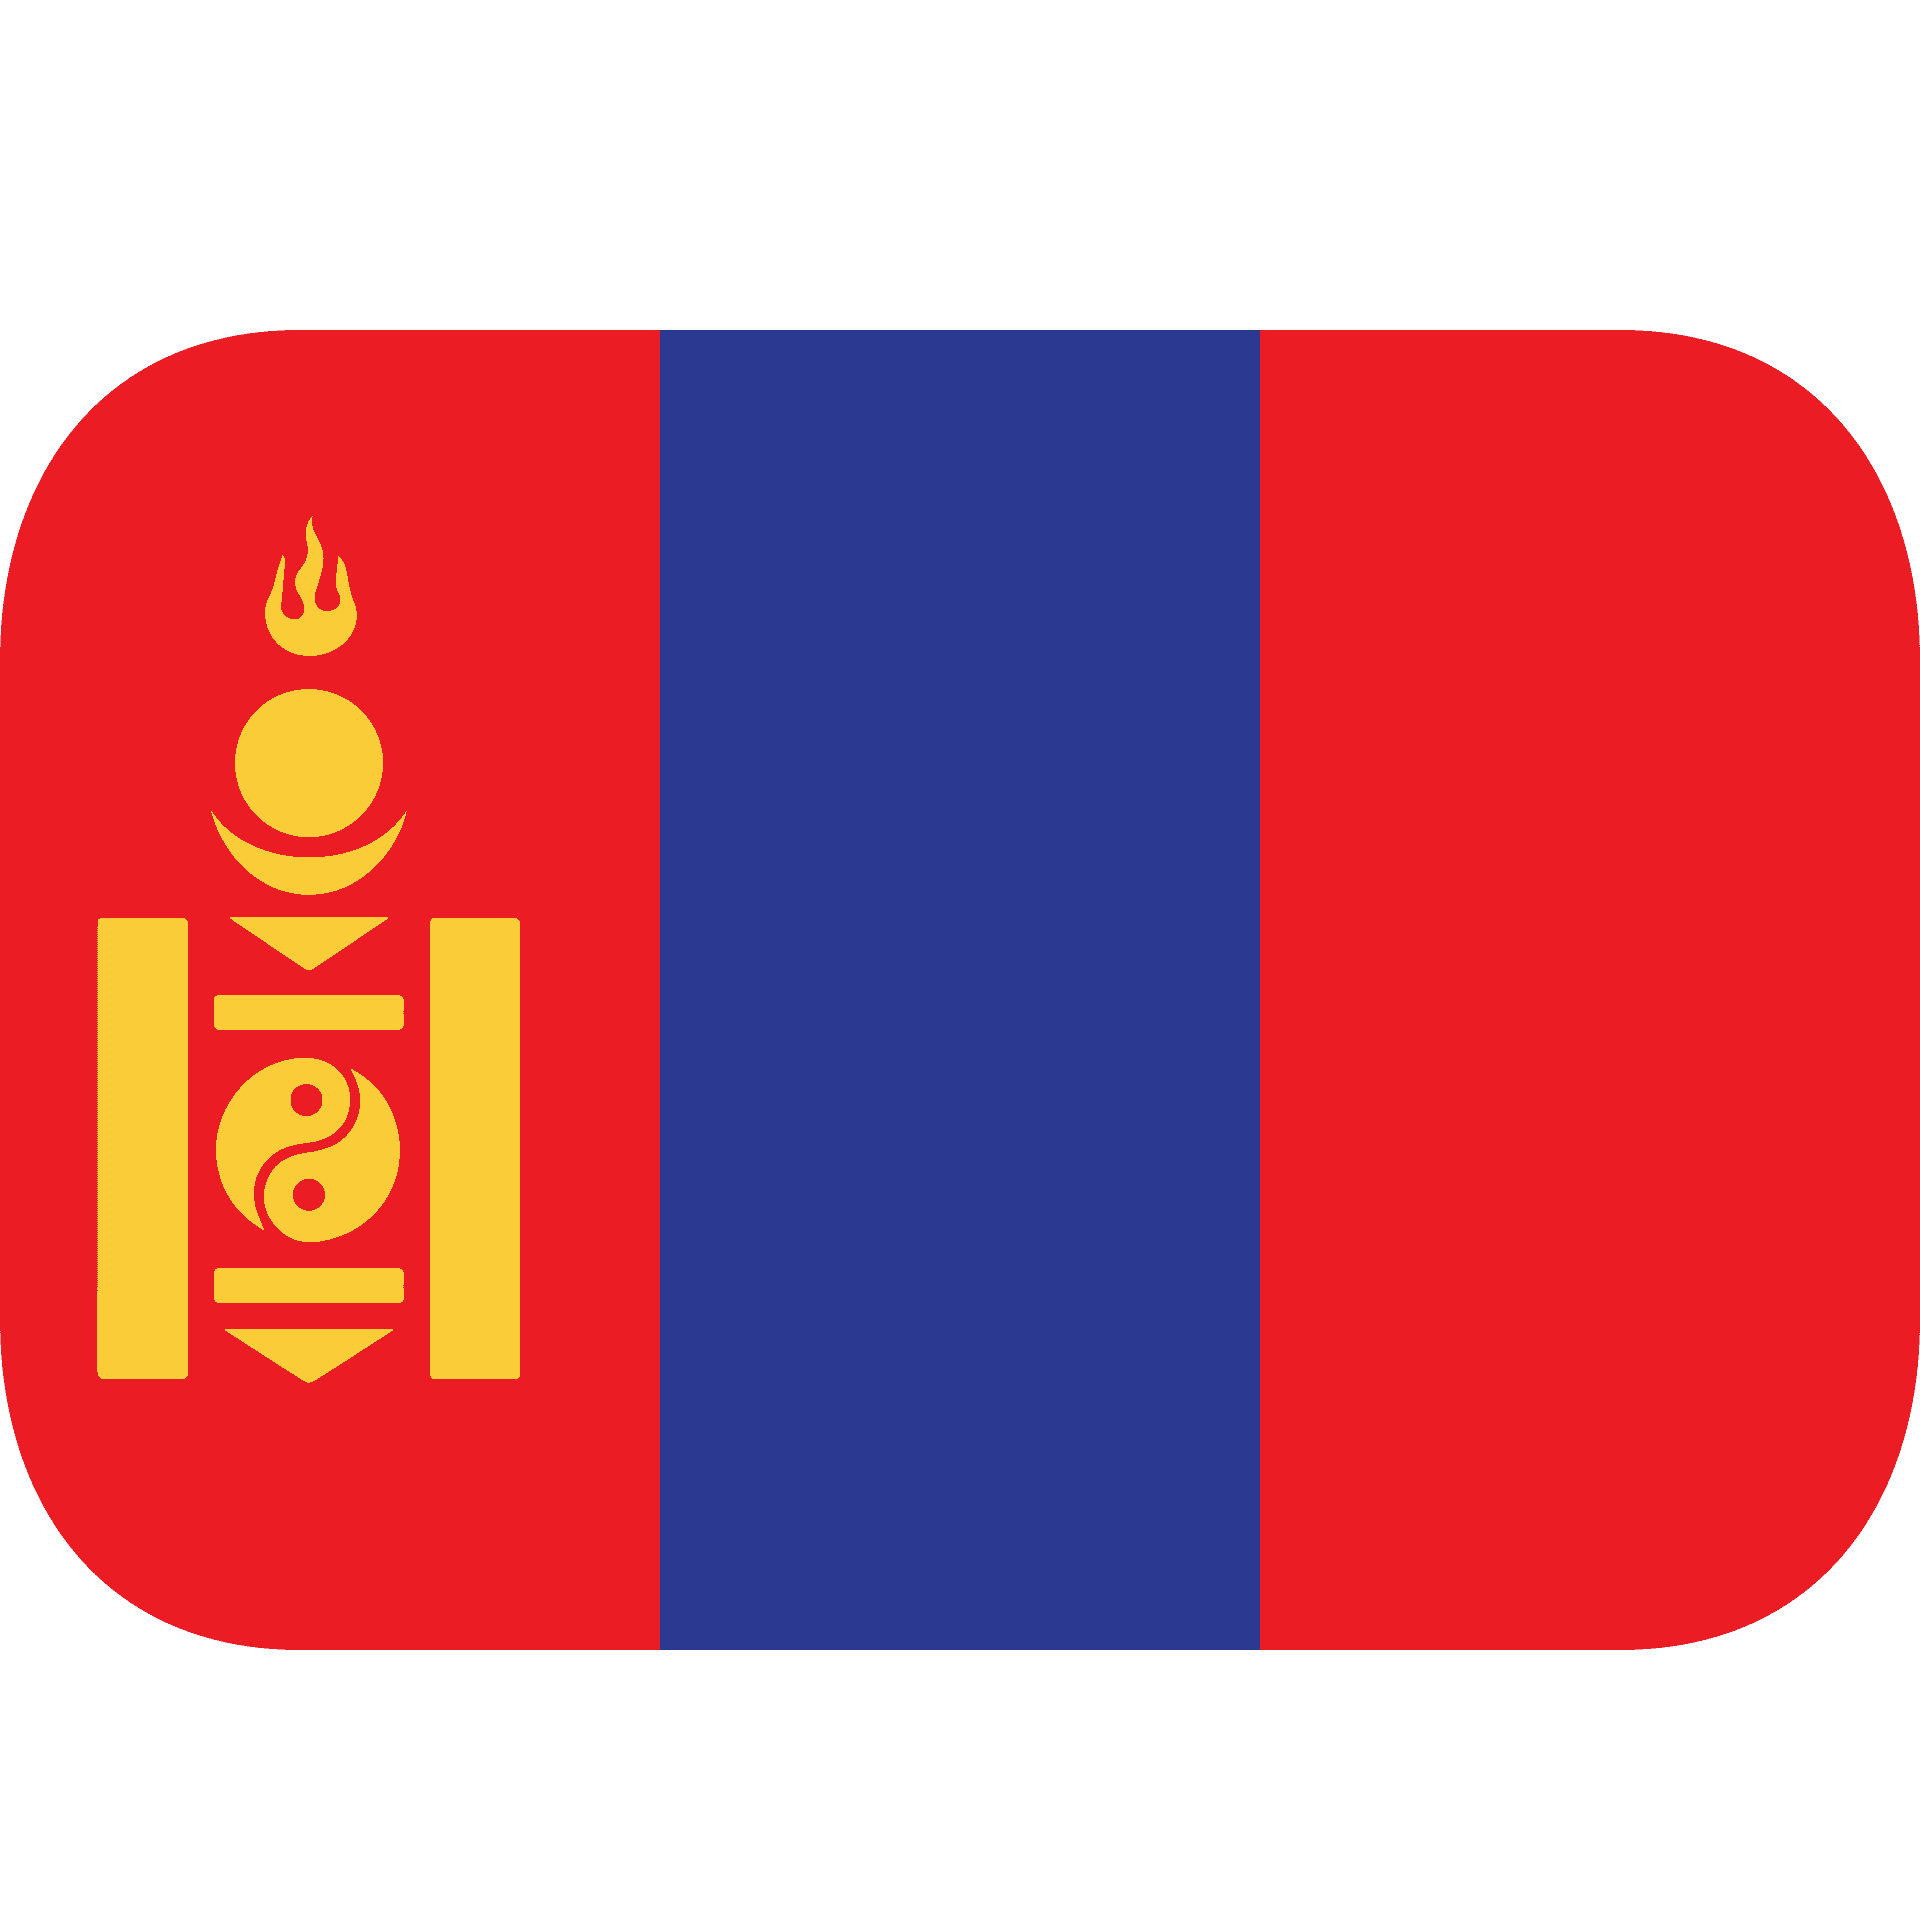 A Red And Blue Flag With A Yellow Symbol